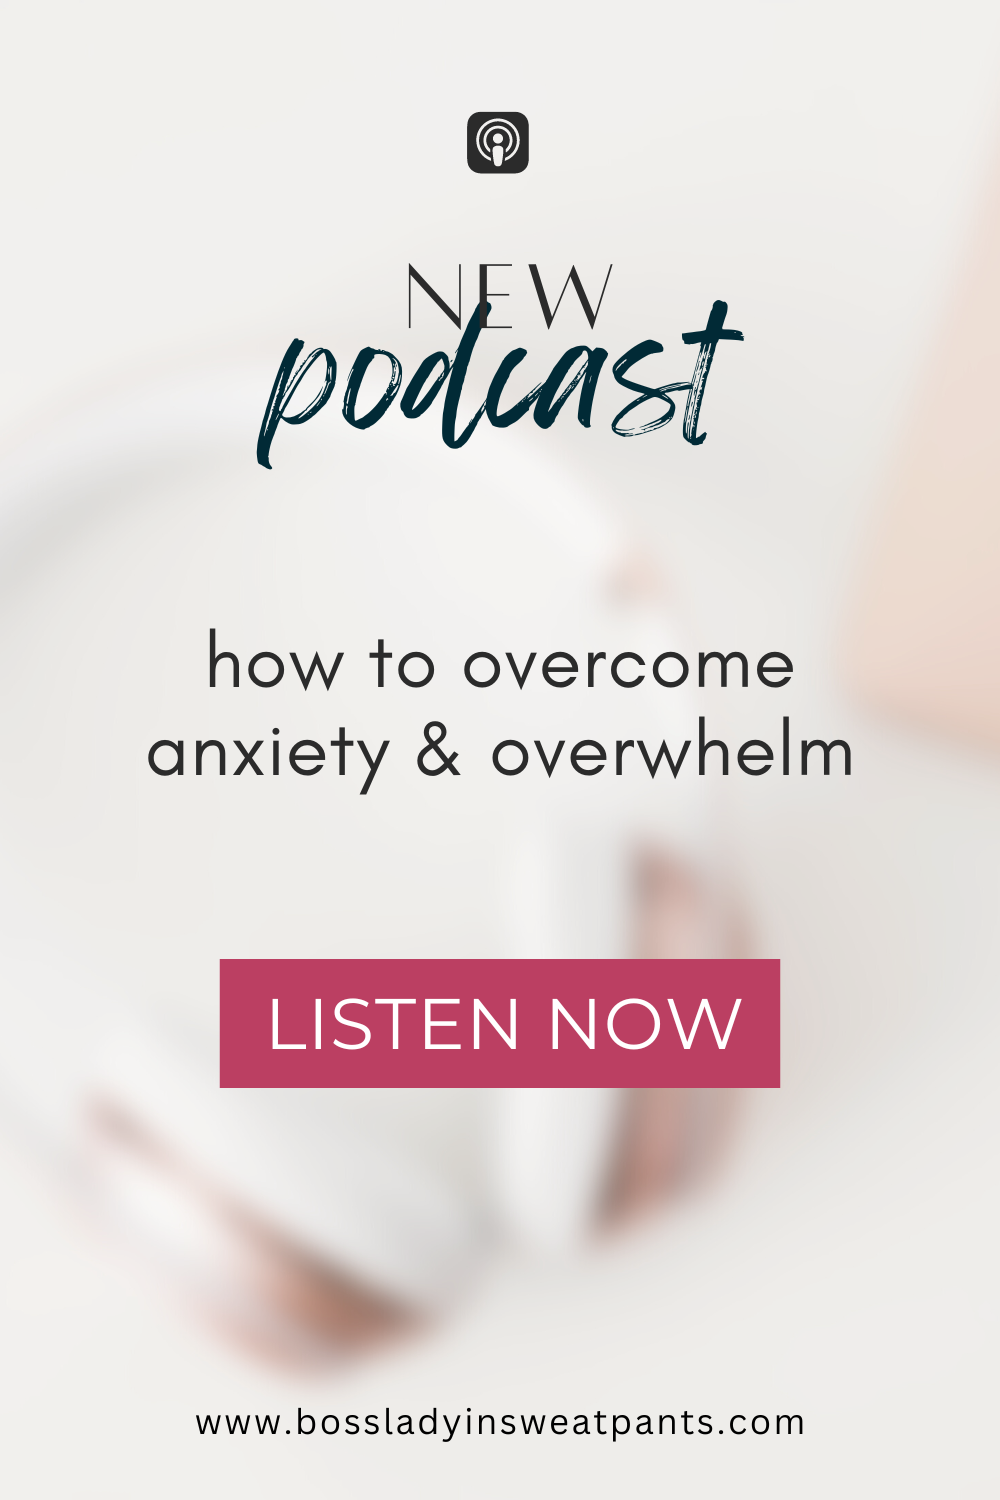 faded photo with text: new podcast: how to overcome anxiety & overwhelm. Button: listen now